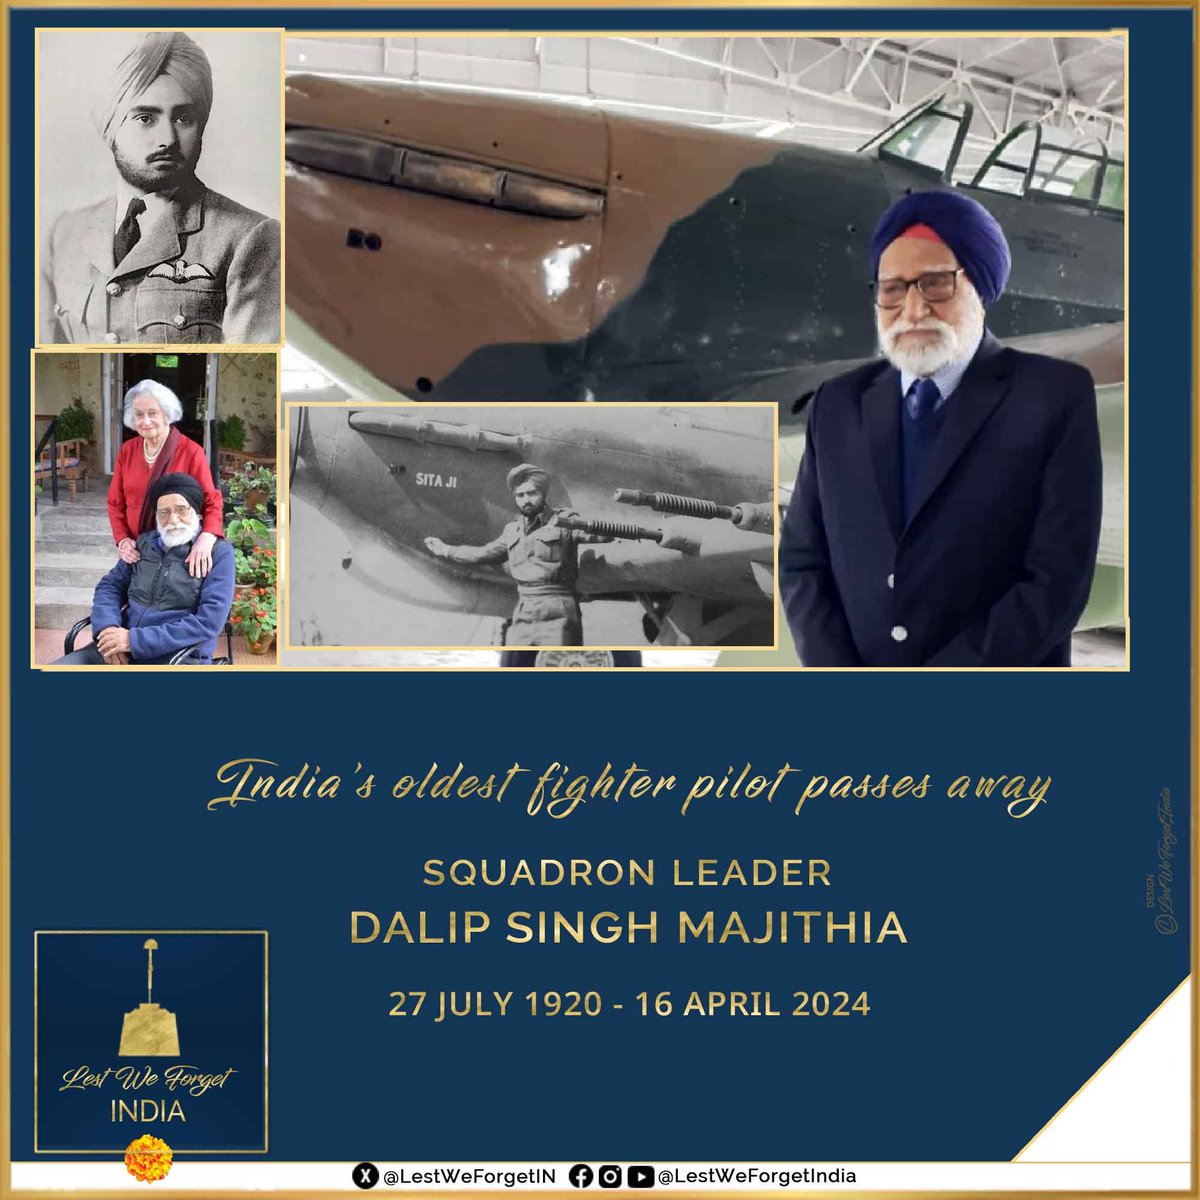 India's oldest fighter pilot passes away #LestWeForgetIndia🇮🇳 Squadron Leader Dalip Singh Majithia passed away early today, 16 April 2024, a few months short of 104 years. Born on 27 July 1920 in Shimla, Sqn Ldr Majithia was commissioned on 01 August 1940 and retired from the…